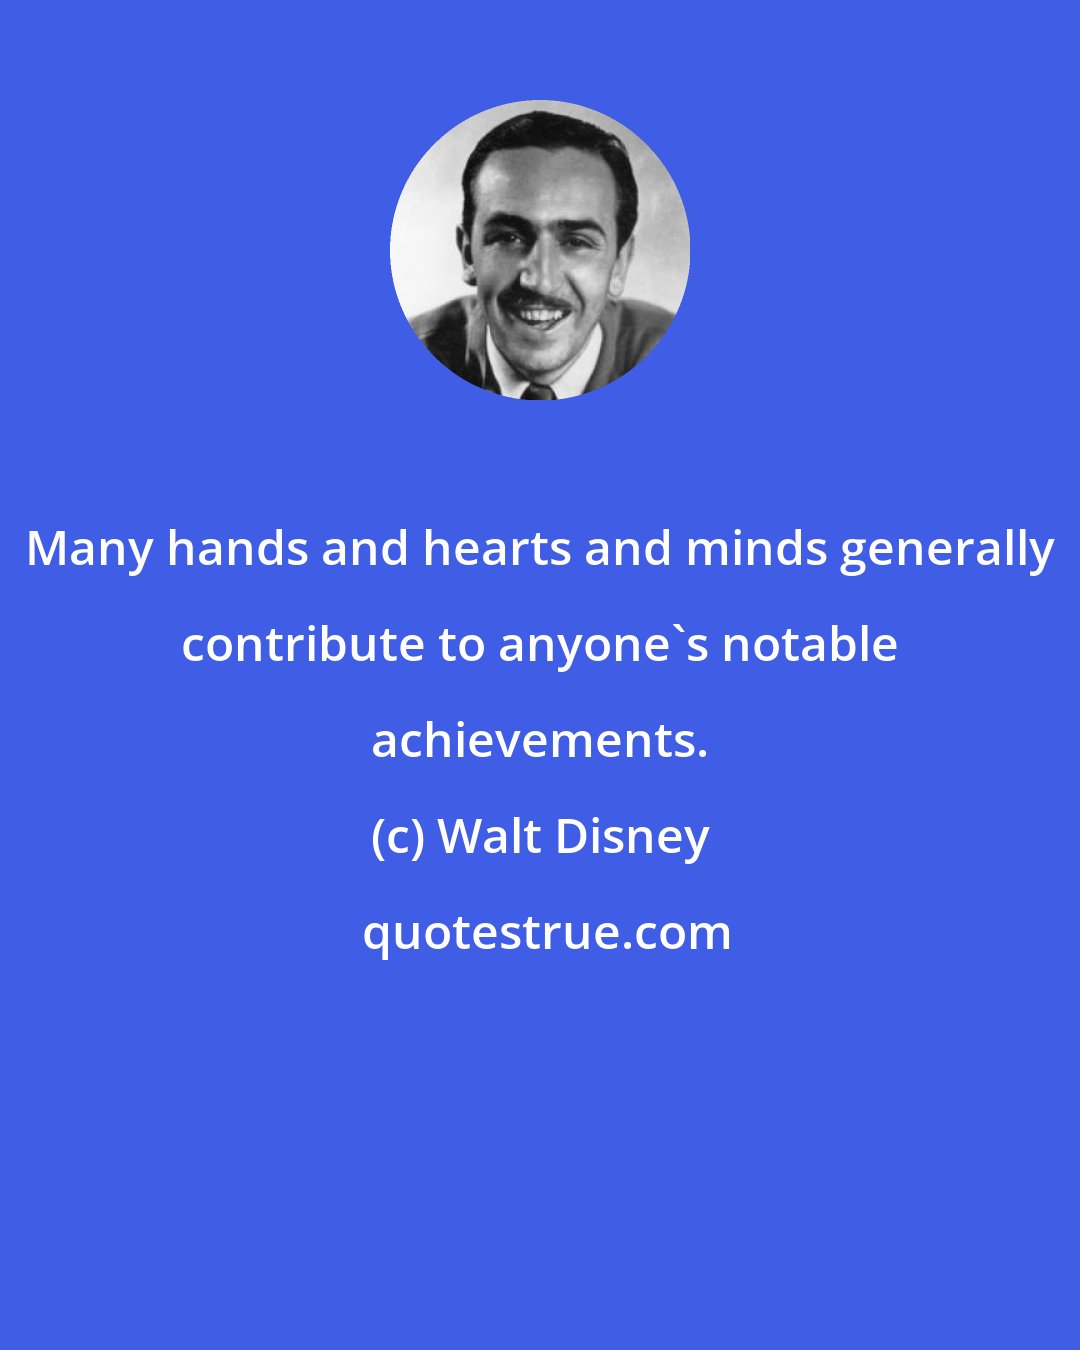 Walt Disney: Many hands and hearts and minds generally contribute to anyone's notable achievements.